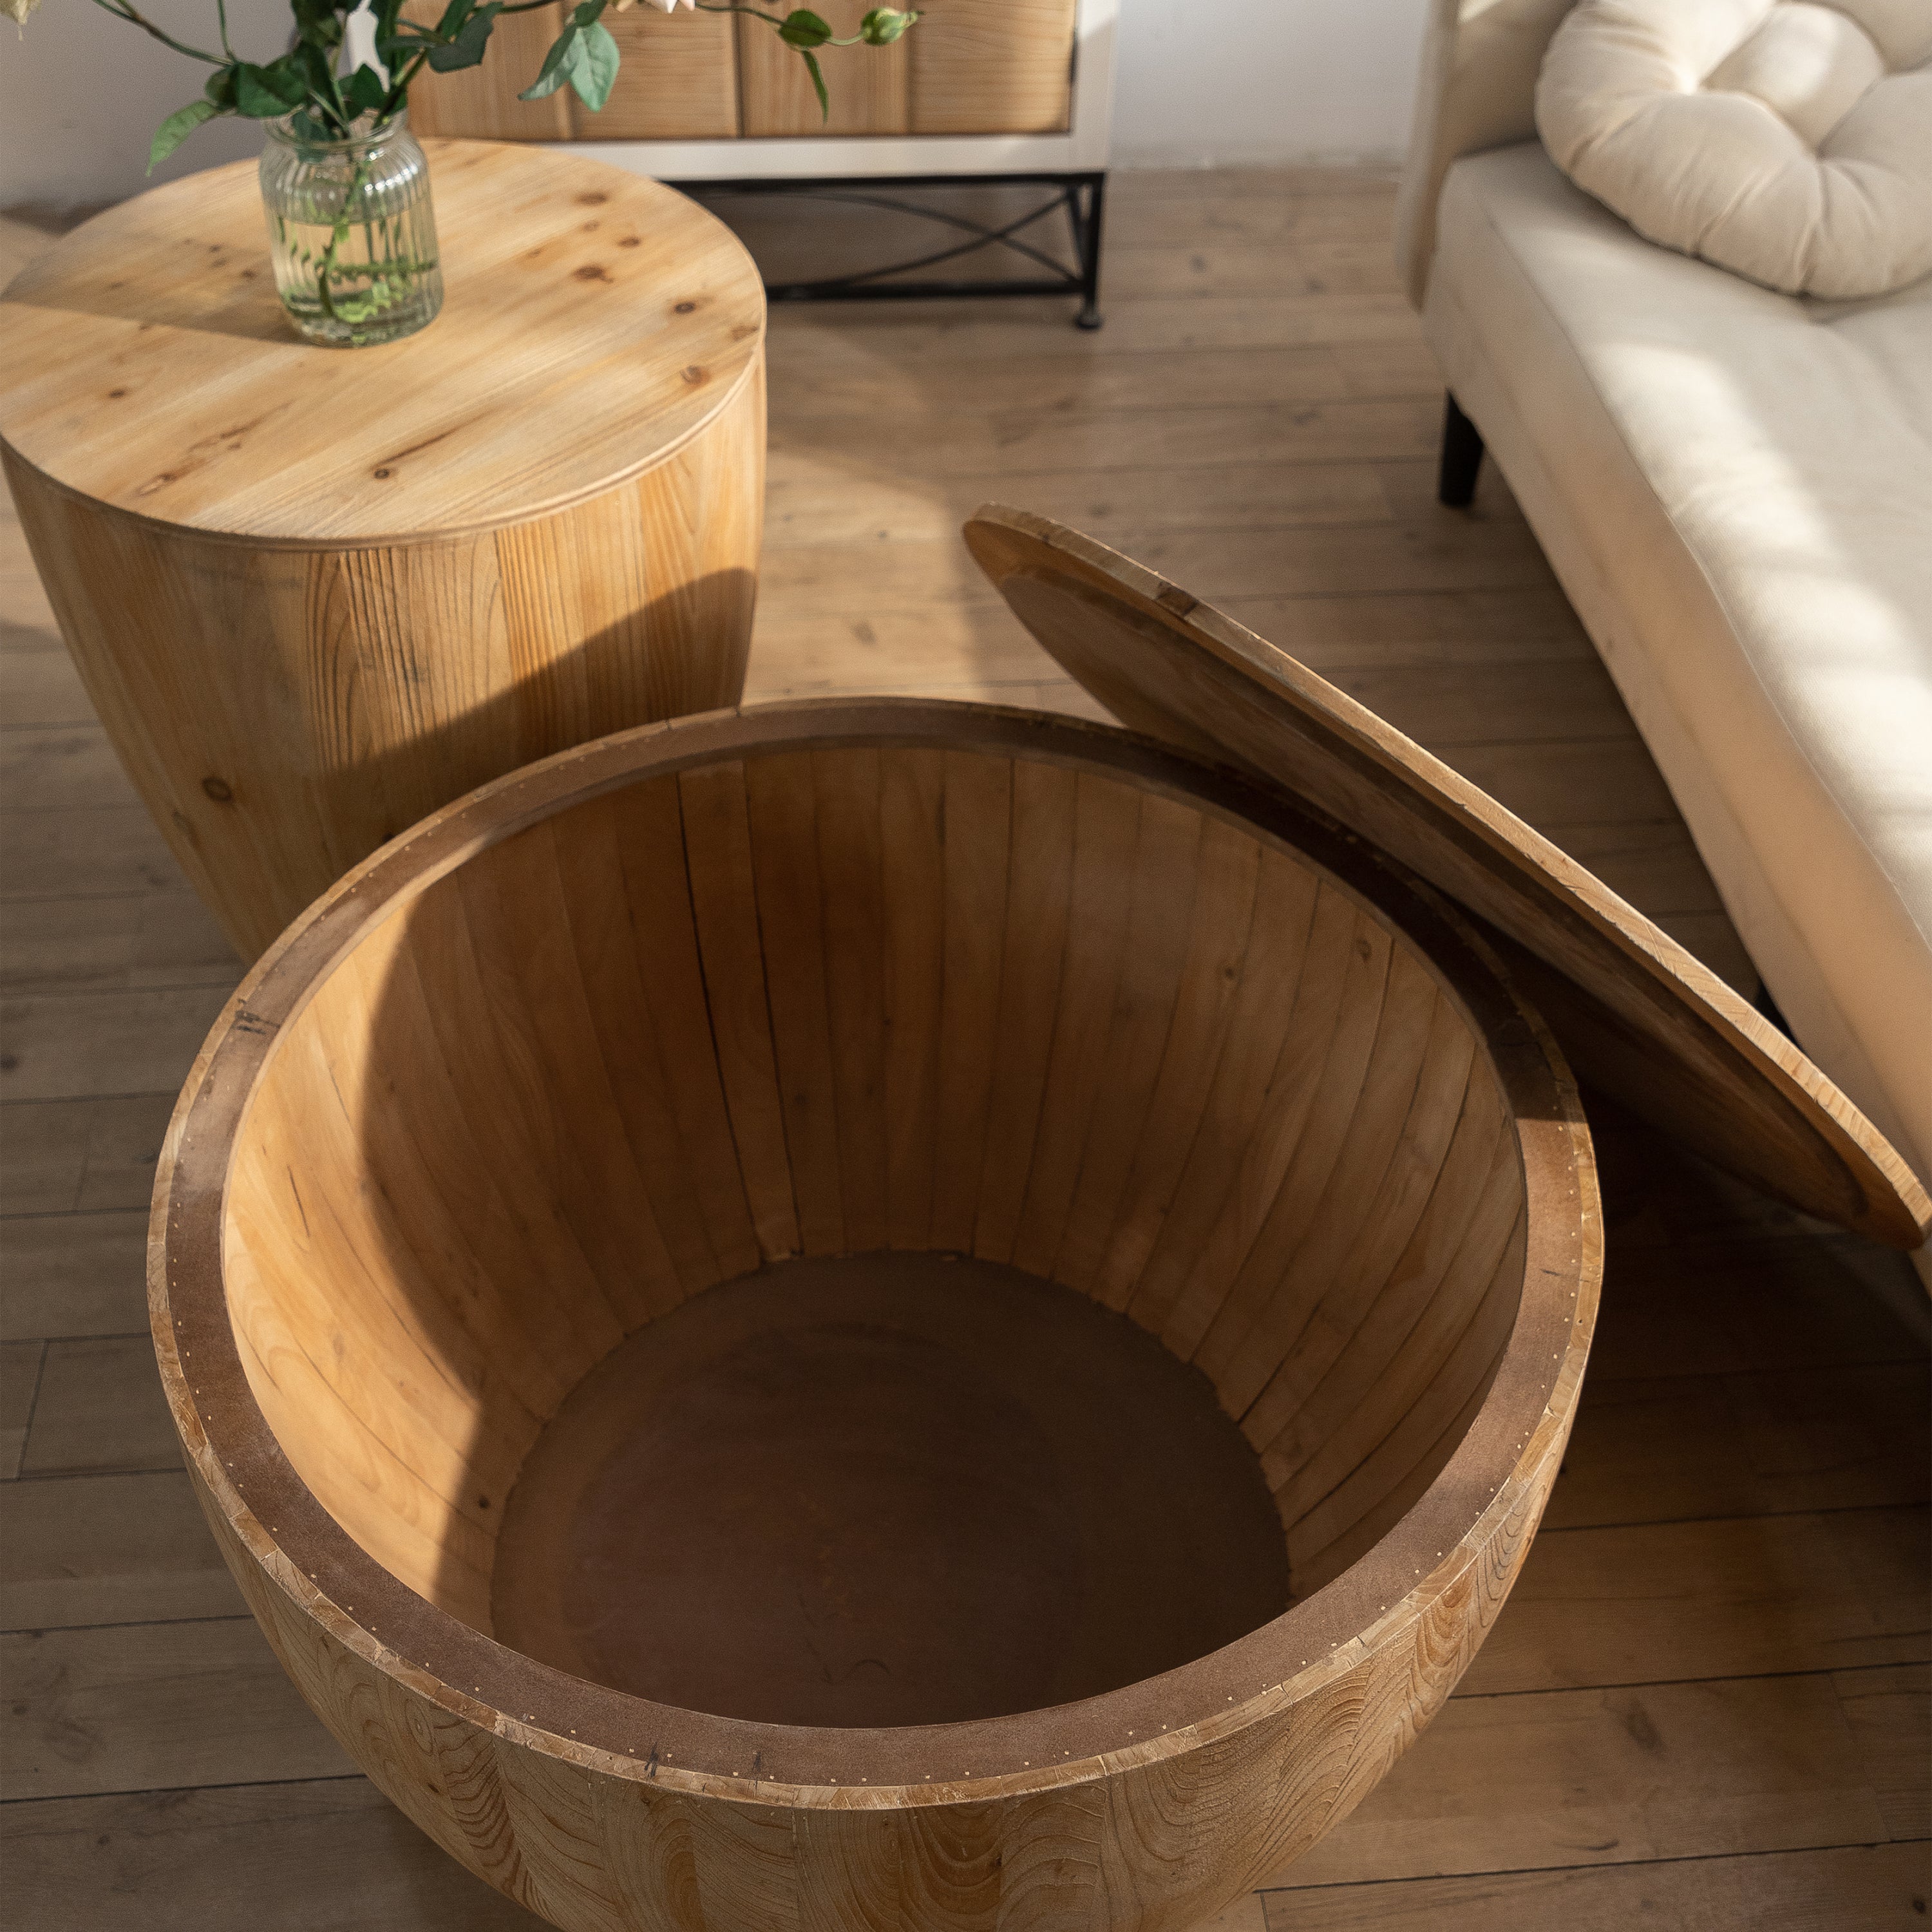 31.50"Vintage Style Bucket Shaped Coffee Table - Natural